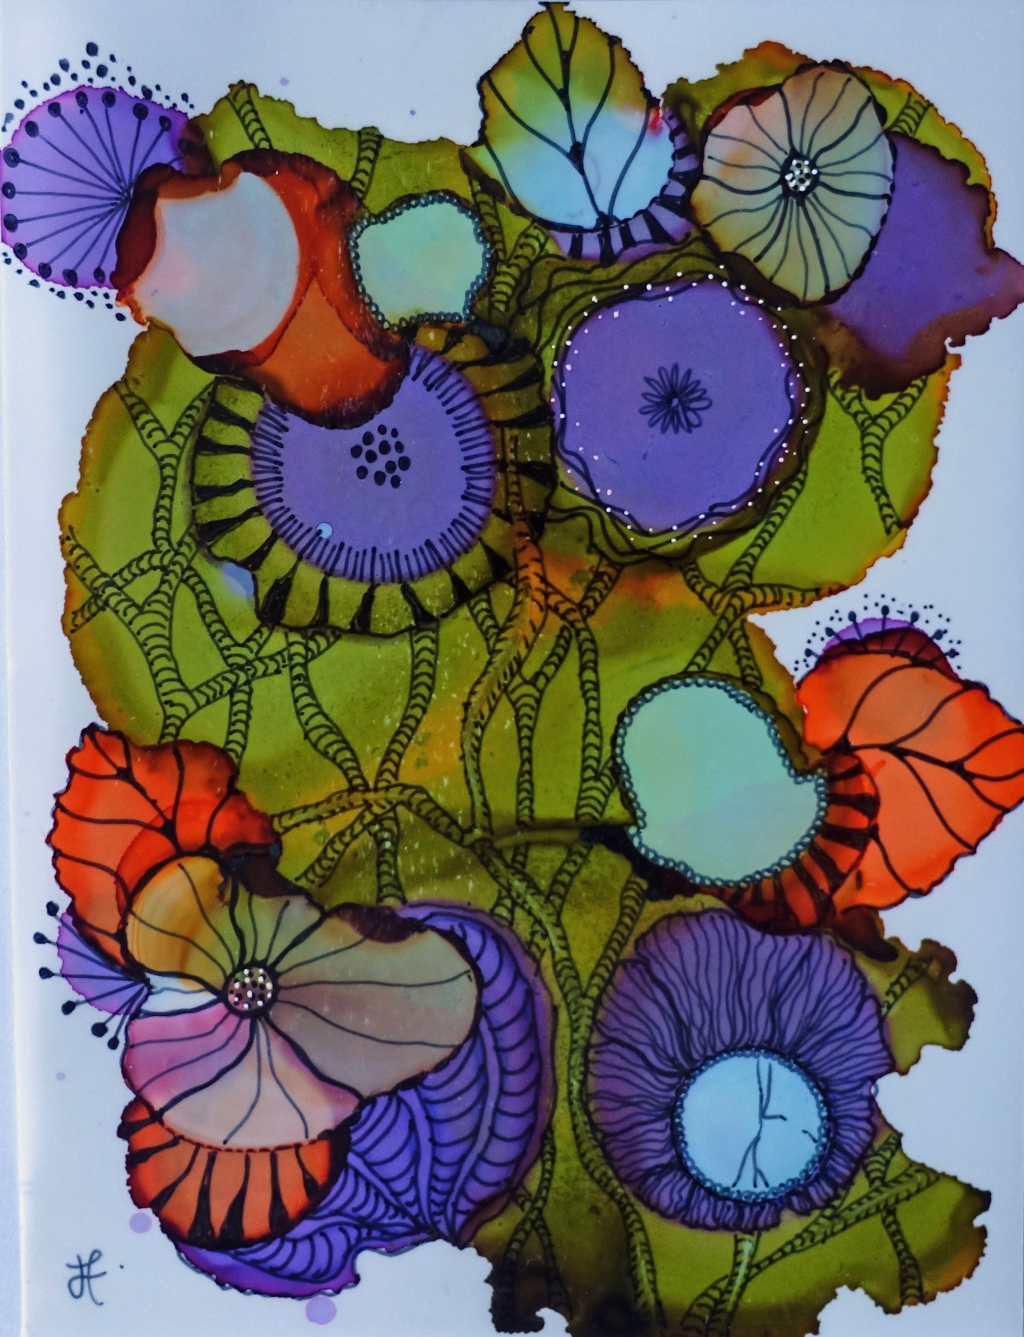 Alkoholtinte / Alcohol inks